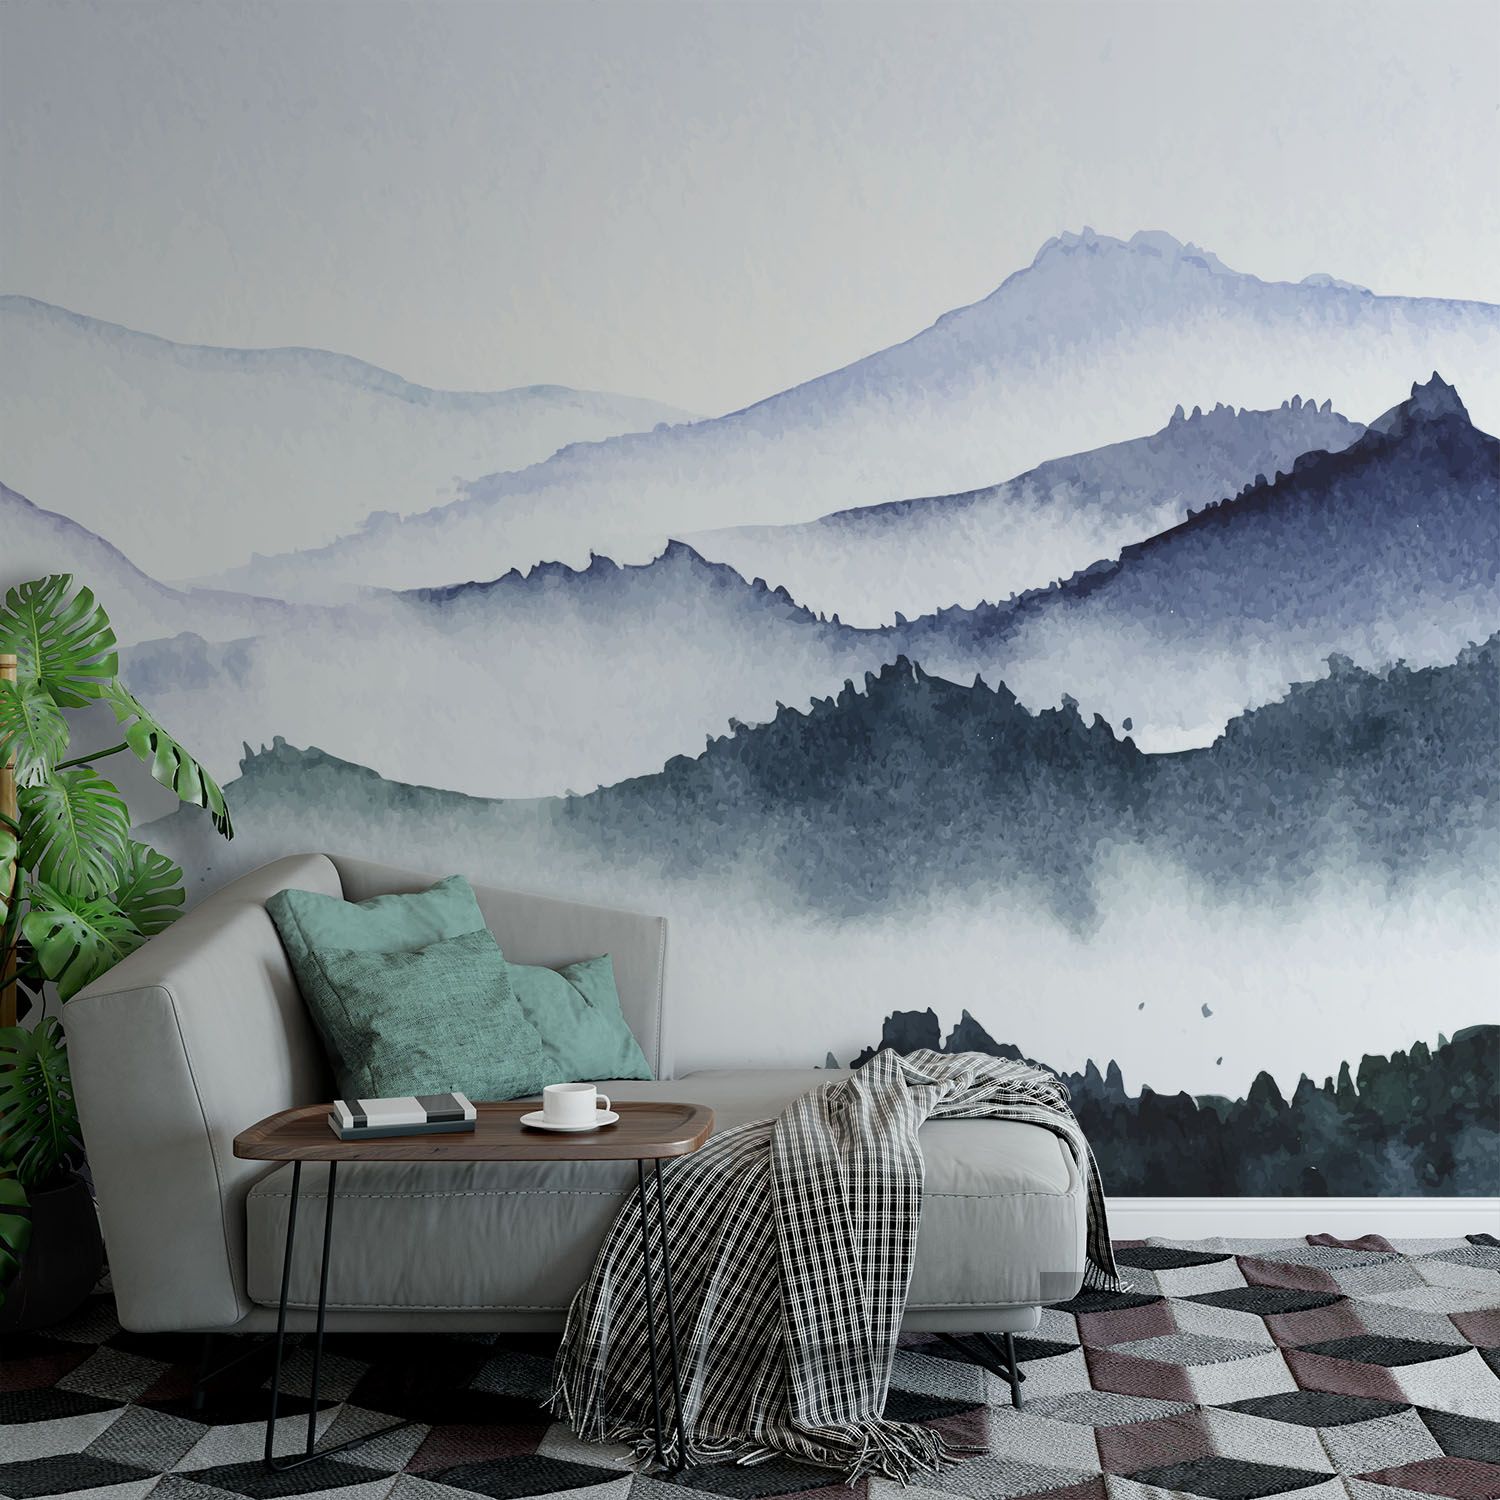 Fogs Between Mountains – Wall Mural, Pvc Free Wall Covering – Wall Murals,  Wall Paper Decor, Home Decor – Bestofbharat Pertaining To Mountains In The Fog Wall Art (View 11 of 15)